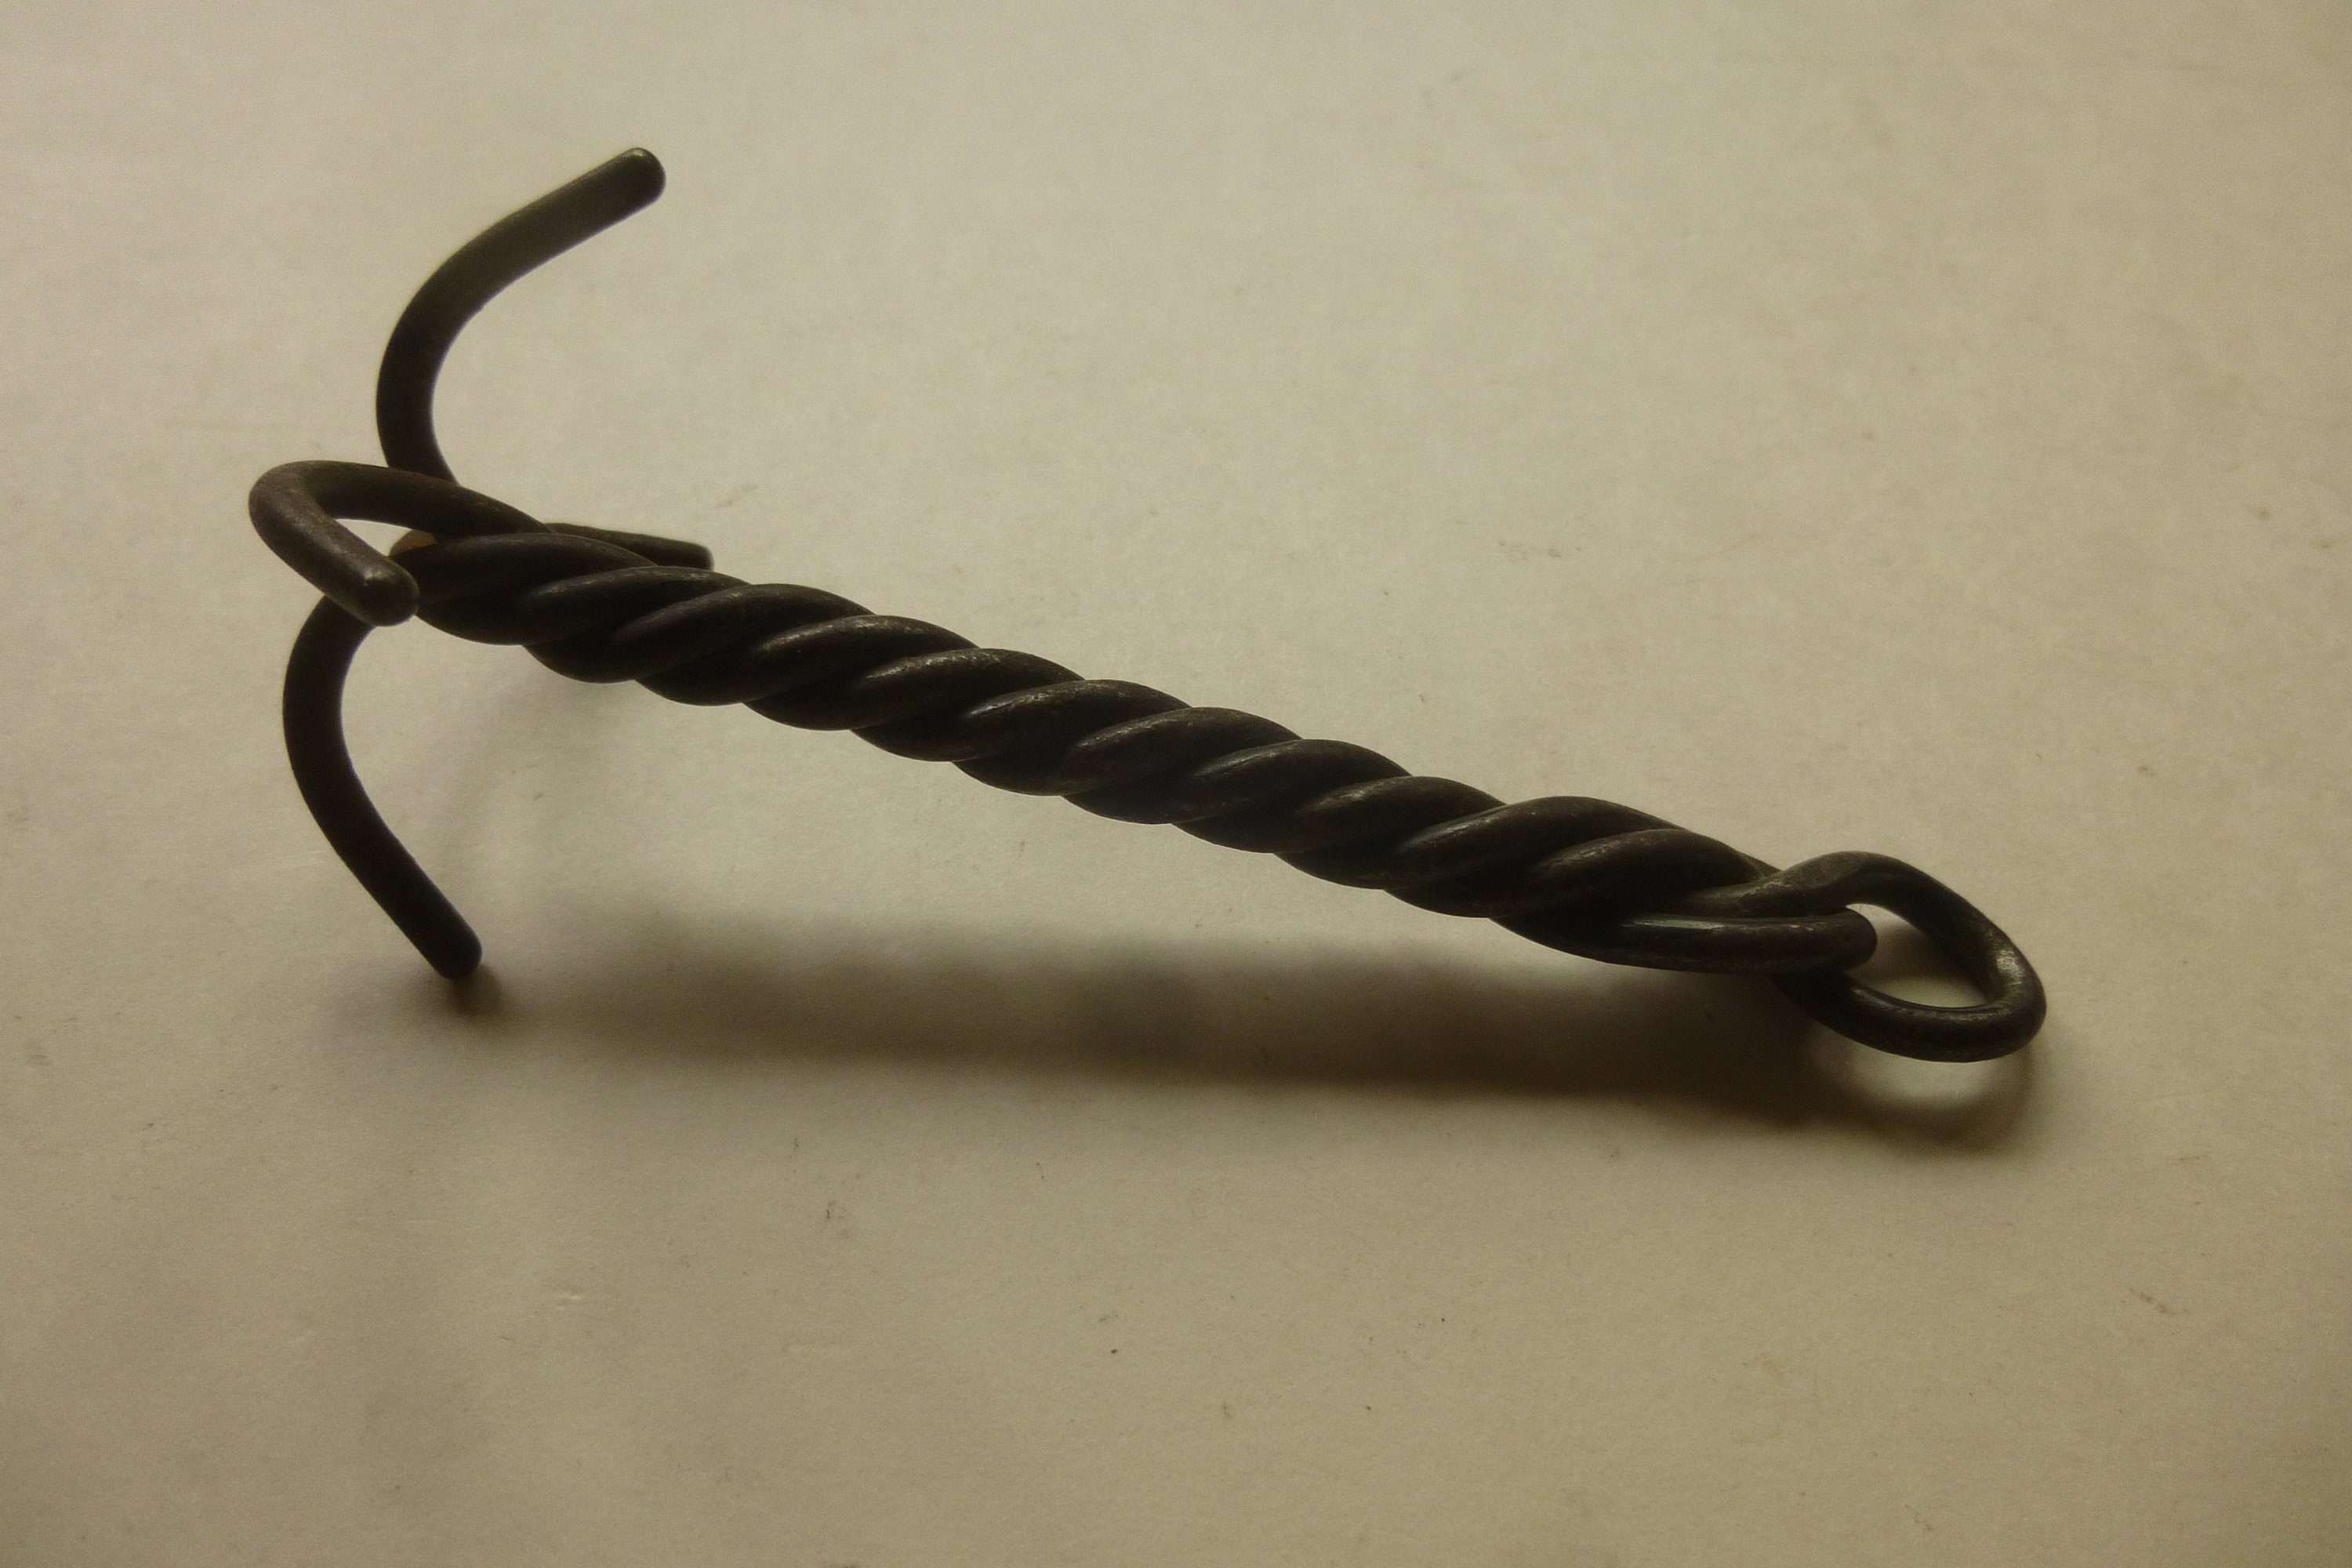 Antique Grappling Hook Drag and Salvage Hook Easily Repurposed for